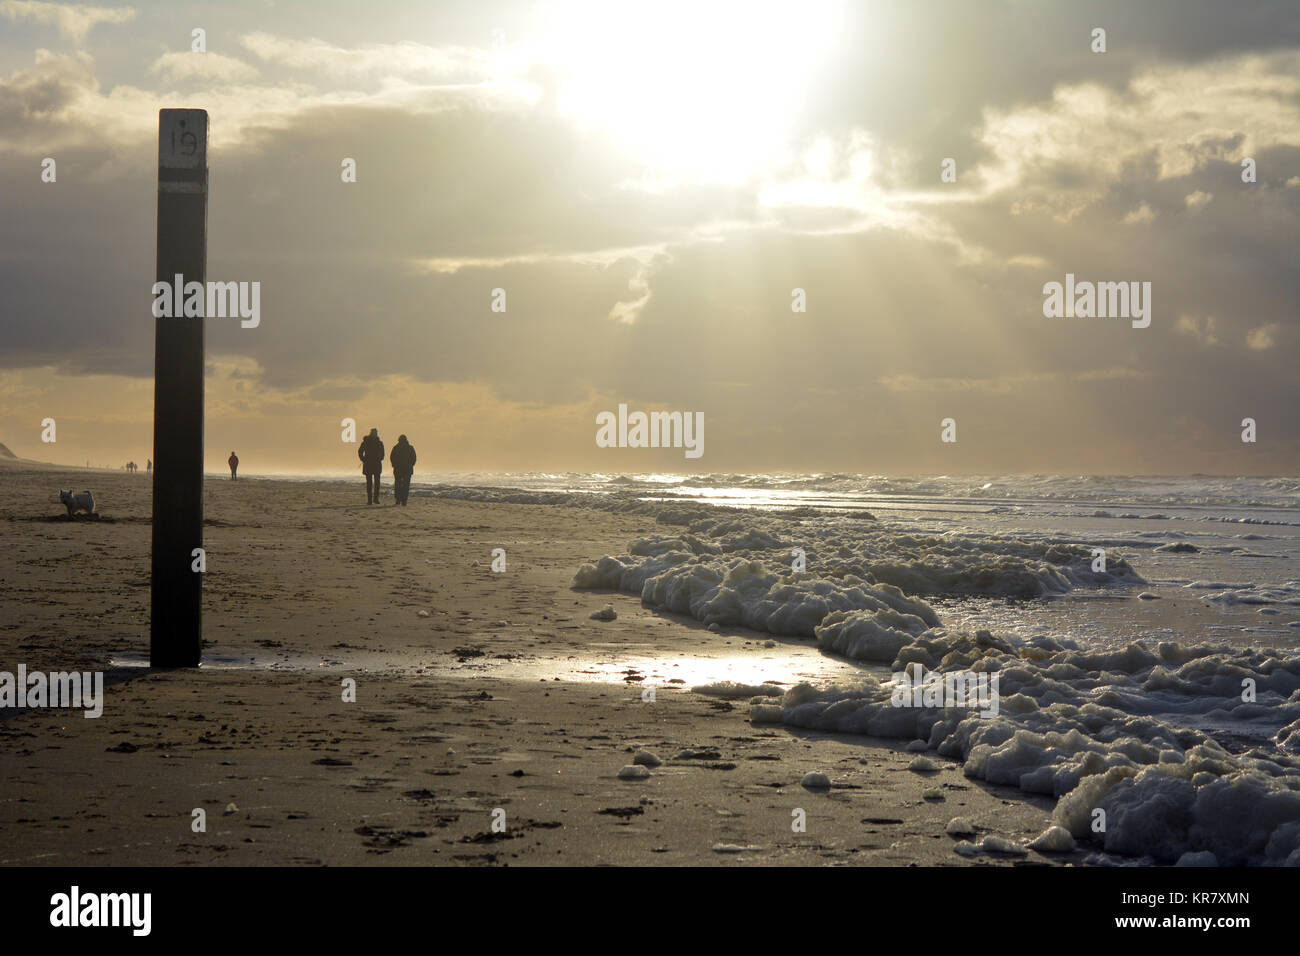 Froth on the beach at sunset on North sea, isle Texel, Netherlands Europe. Stock Photo